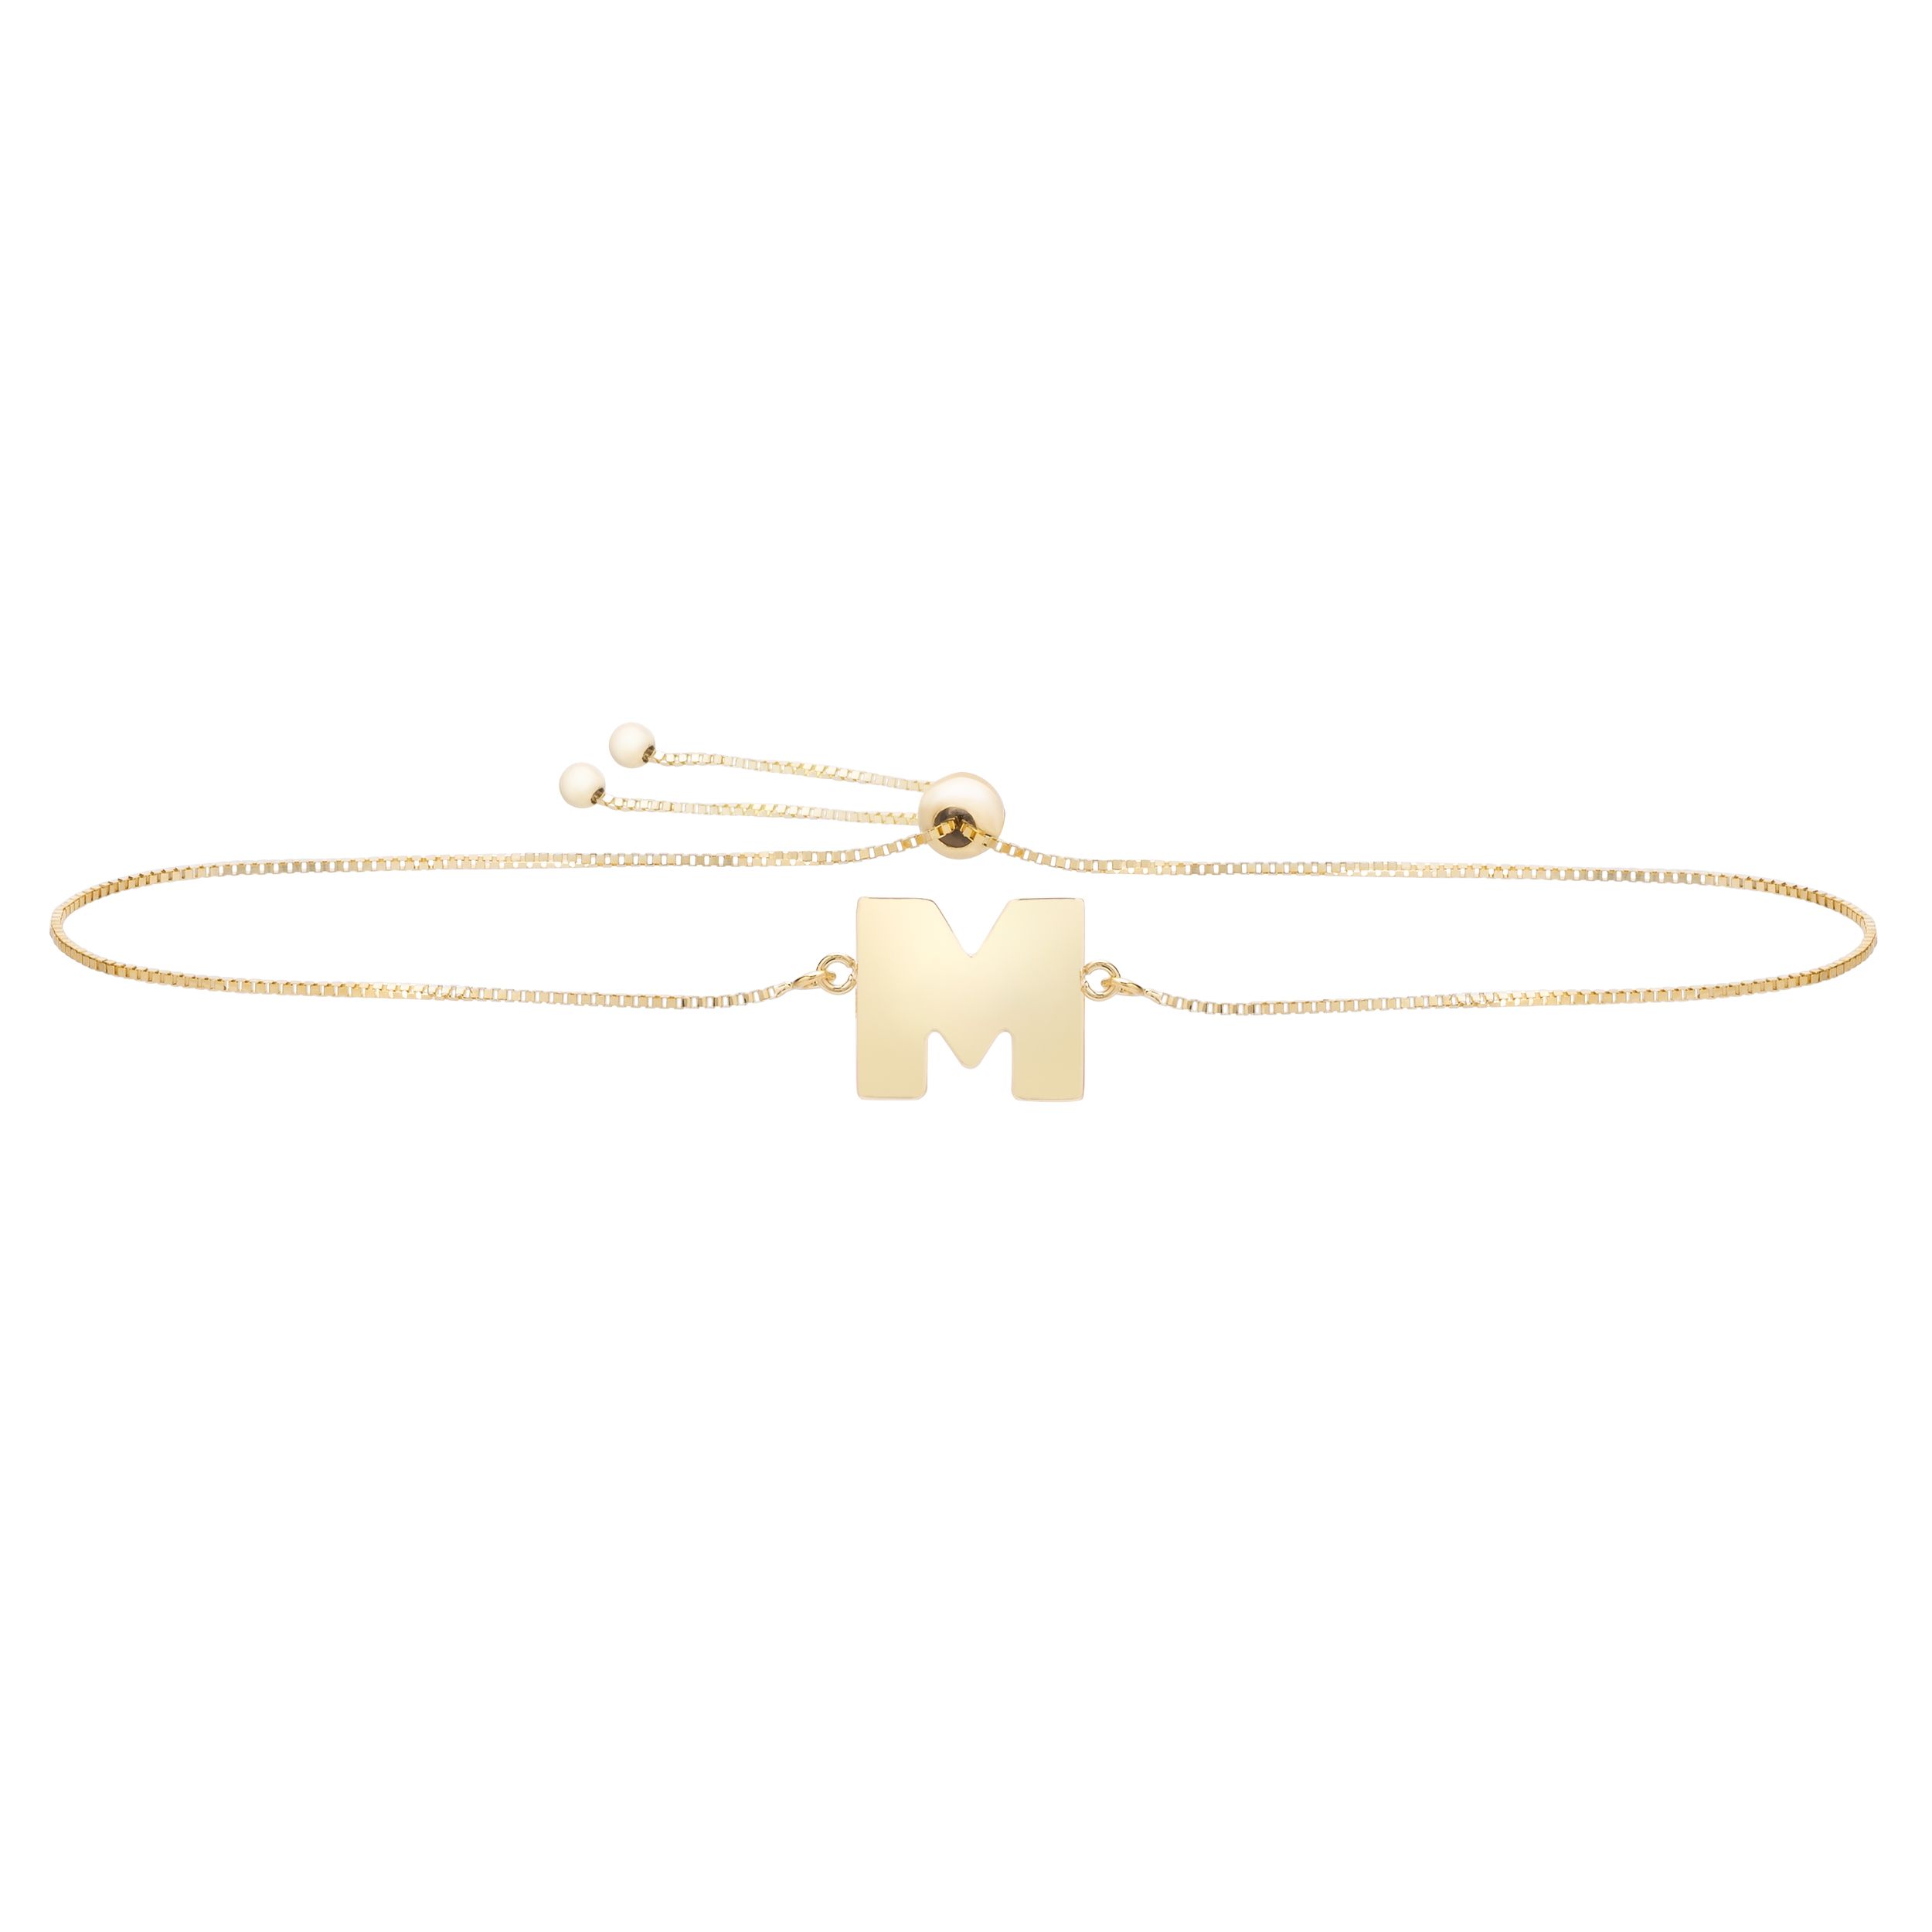 Buy Two Initials Bracelet 14K Gold/two Letters Bracelet/personalize Bracelet/alphabet  Bracelet Online in India - Etsy